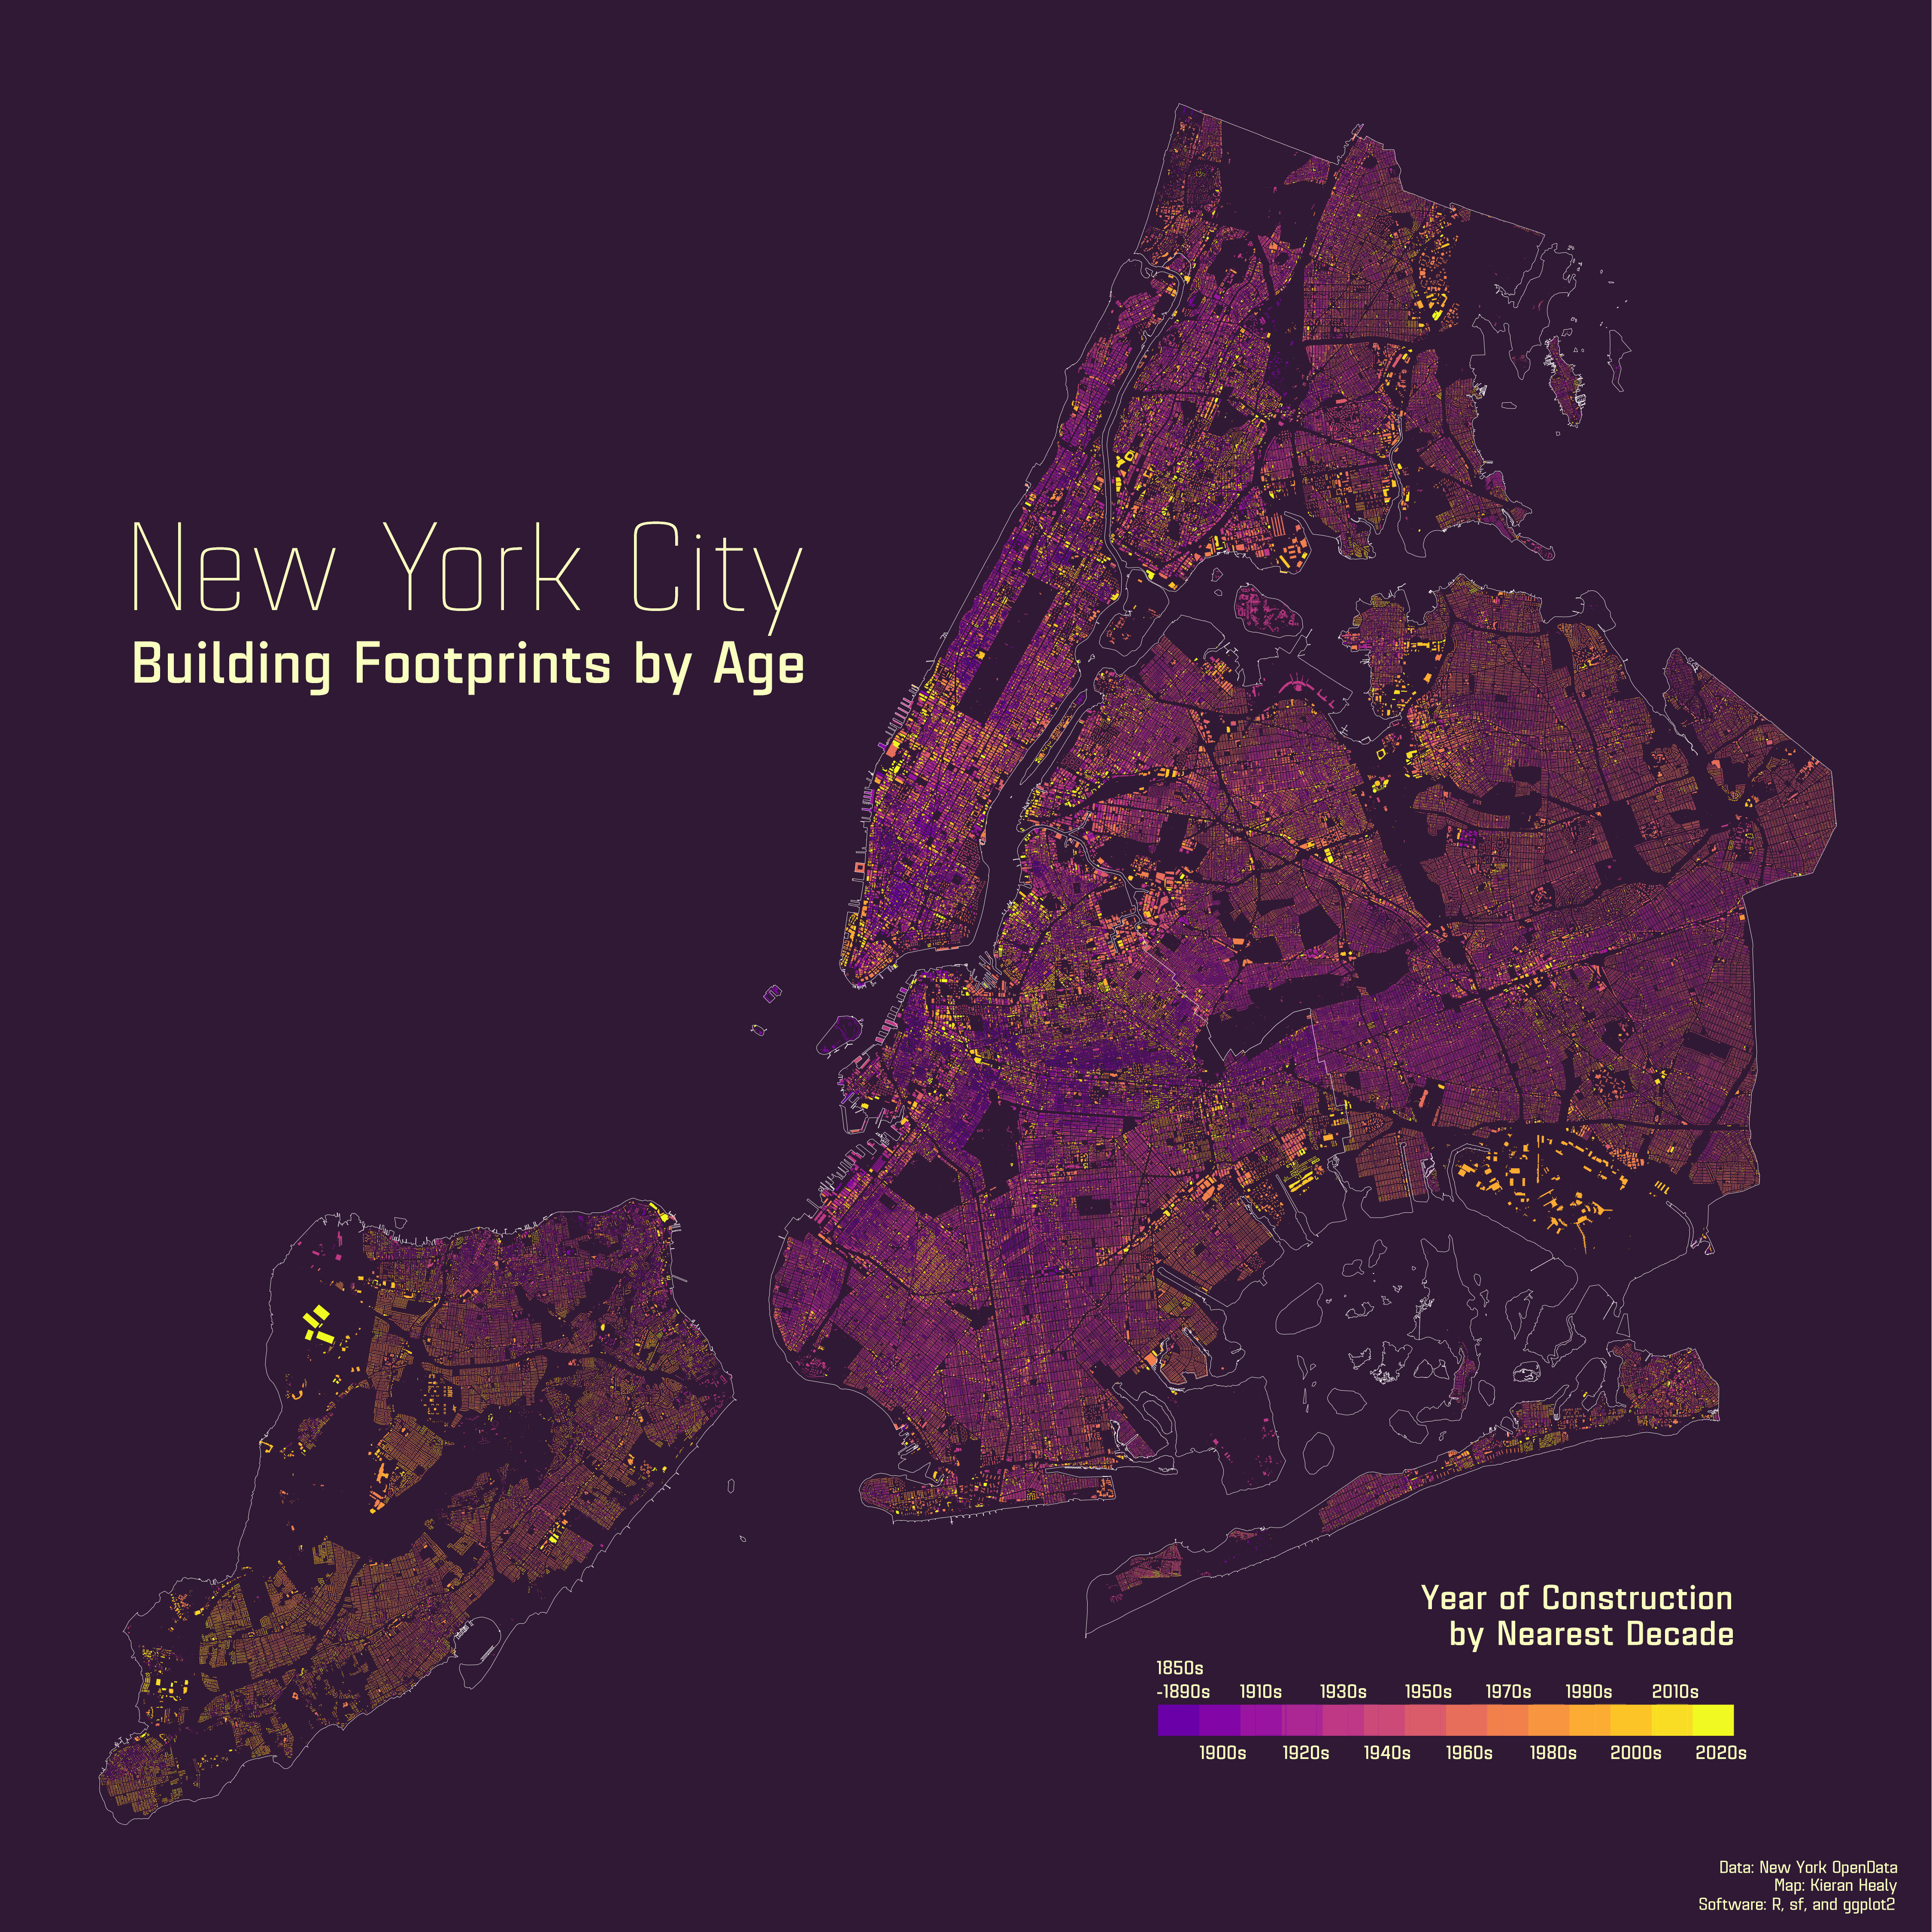 New York City's buildings by decade of construction.